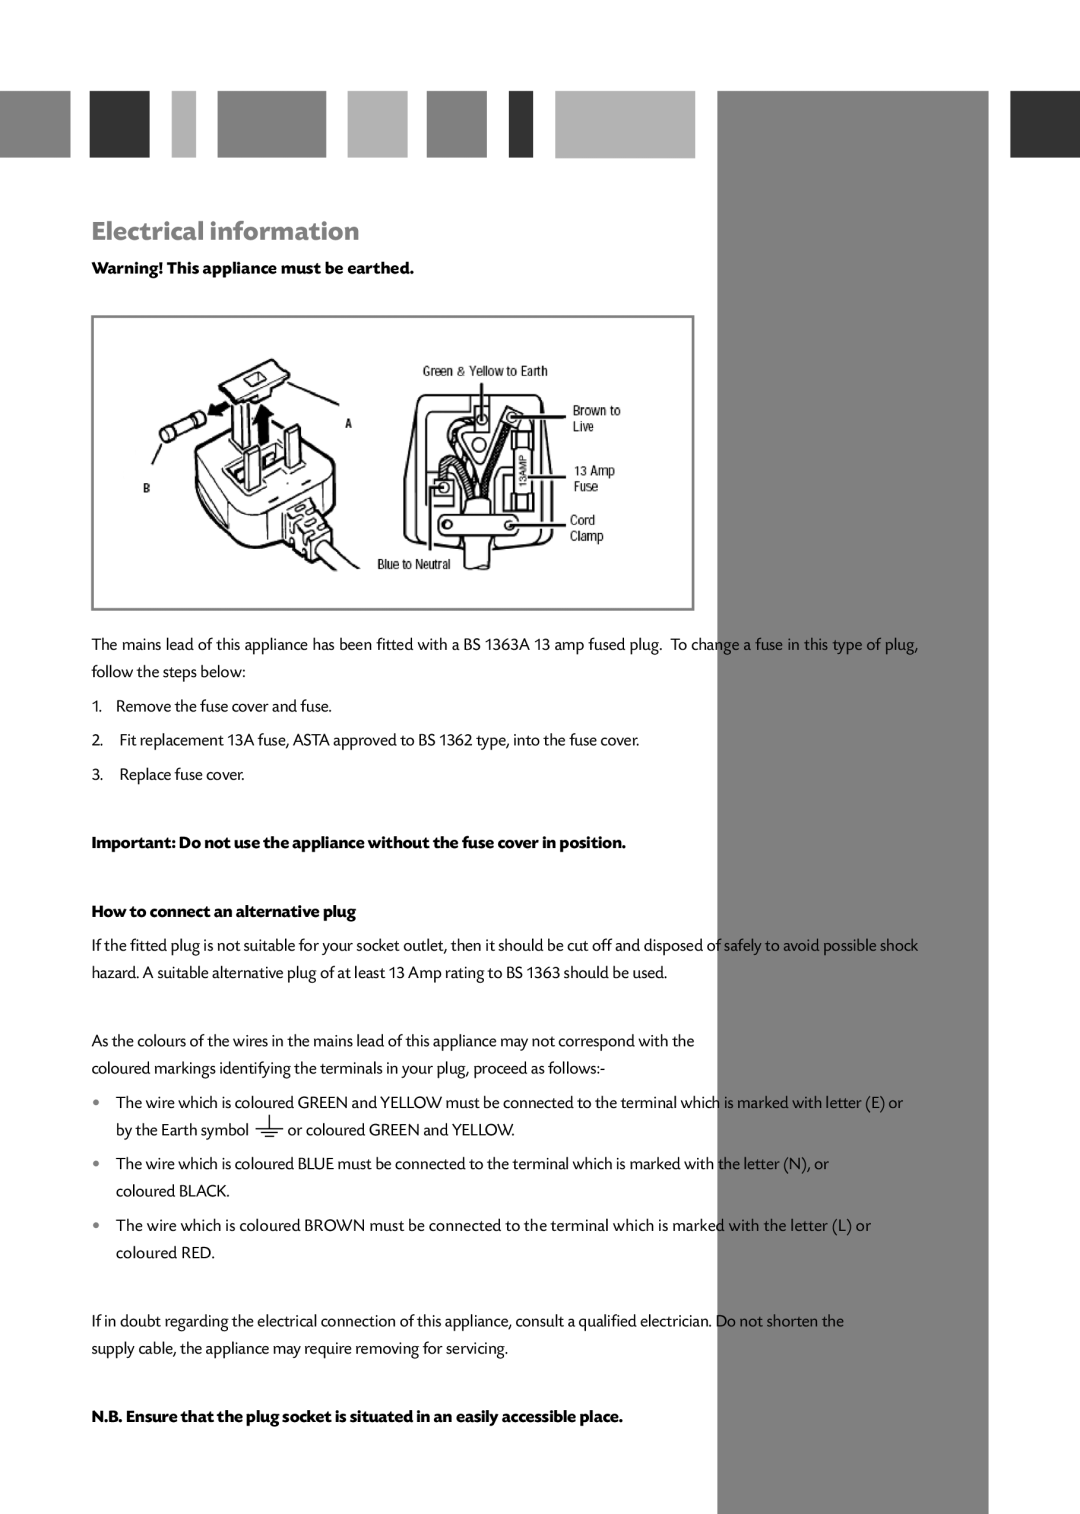 CDA FF180 manual Electrical information, Warning! This appliance must be earthed, How to connect an alternative plug 